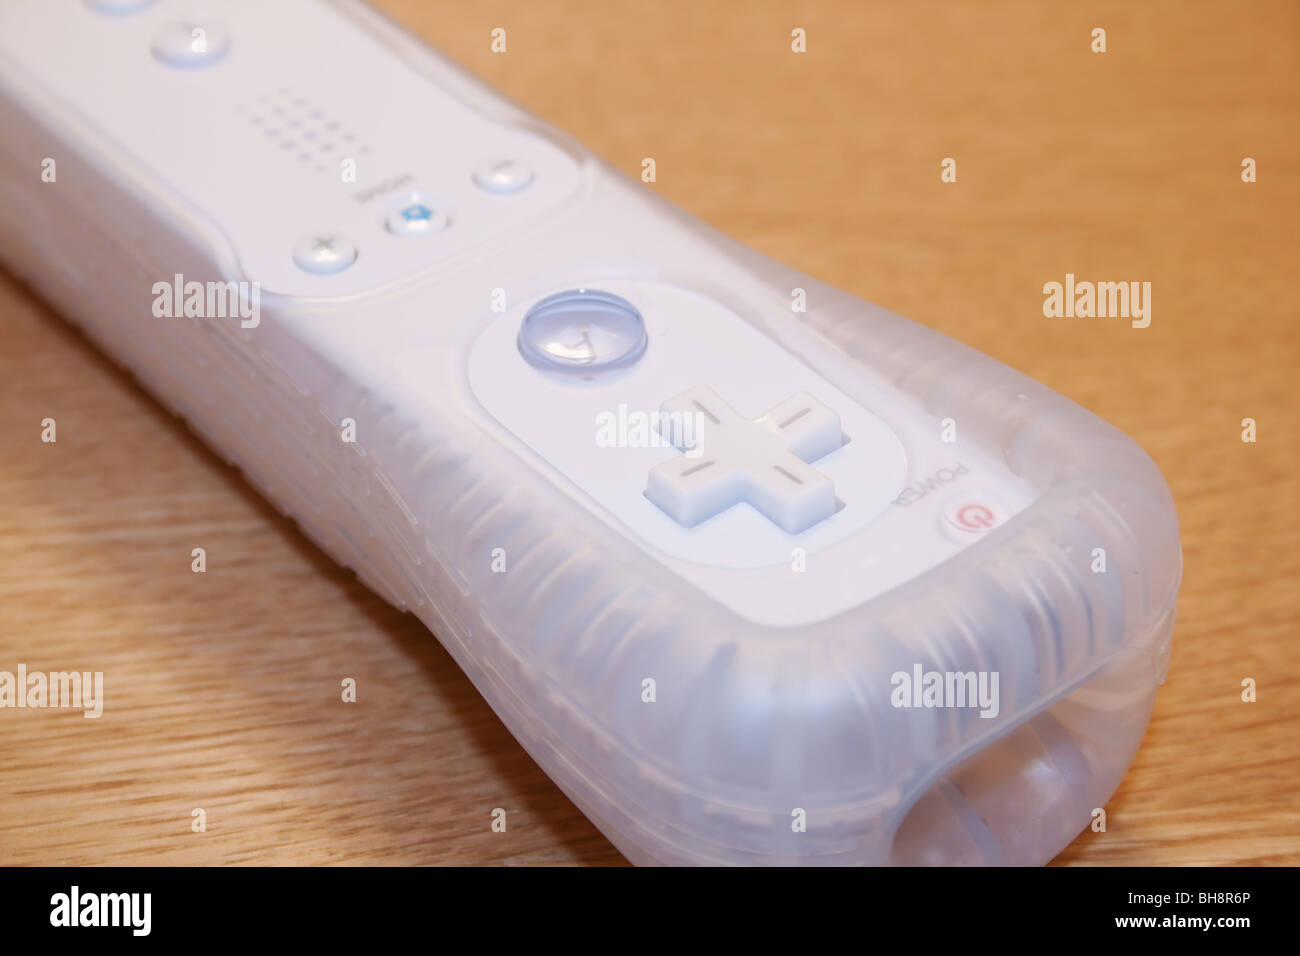 Nintendo Wii handset in rubber sleeve on wood surface Stock Photo - Alamy